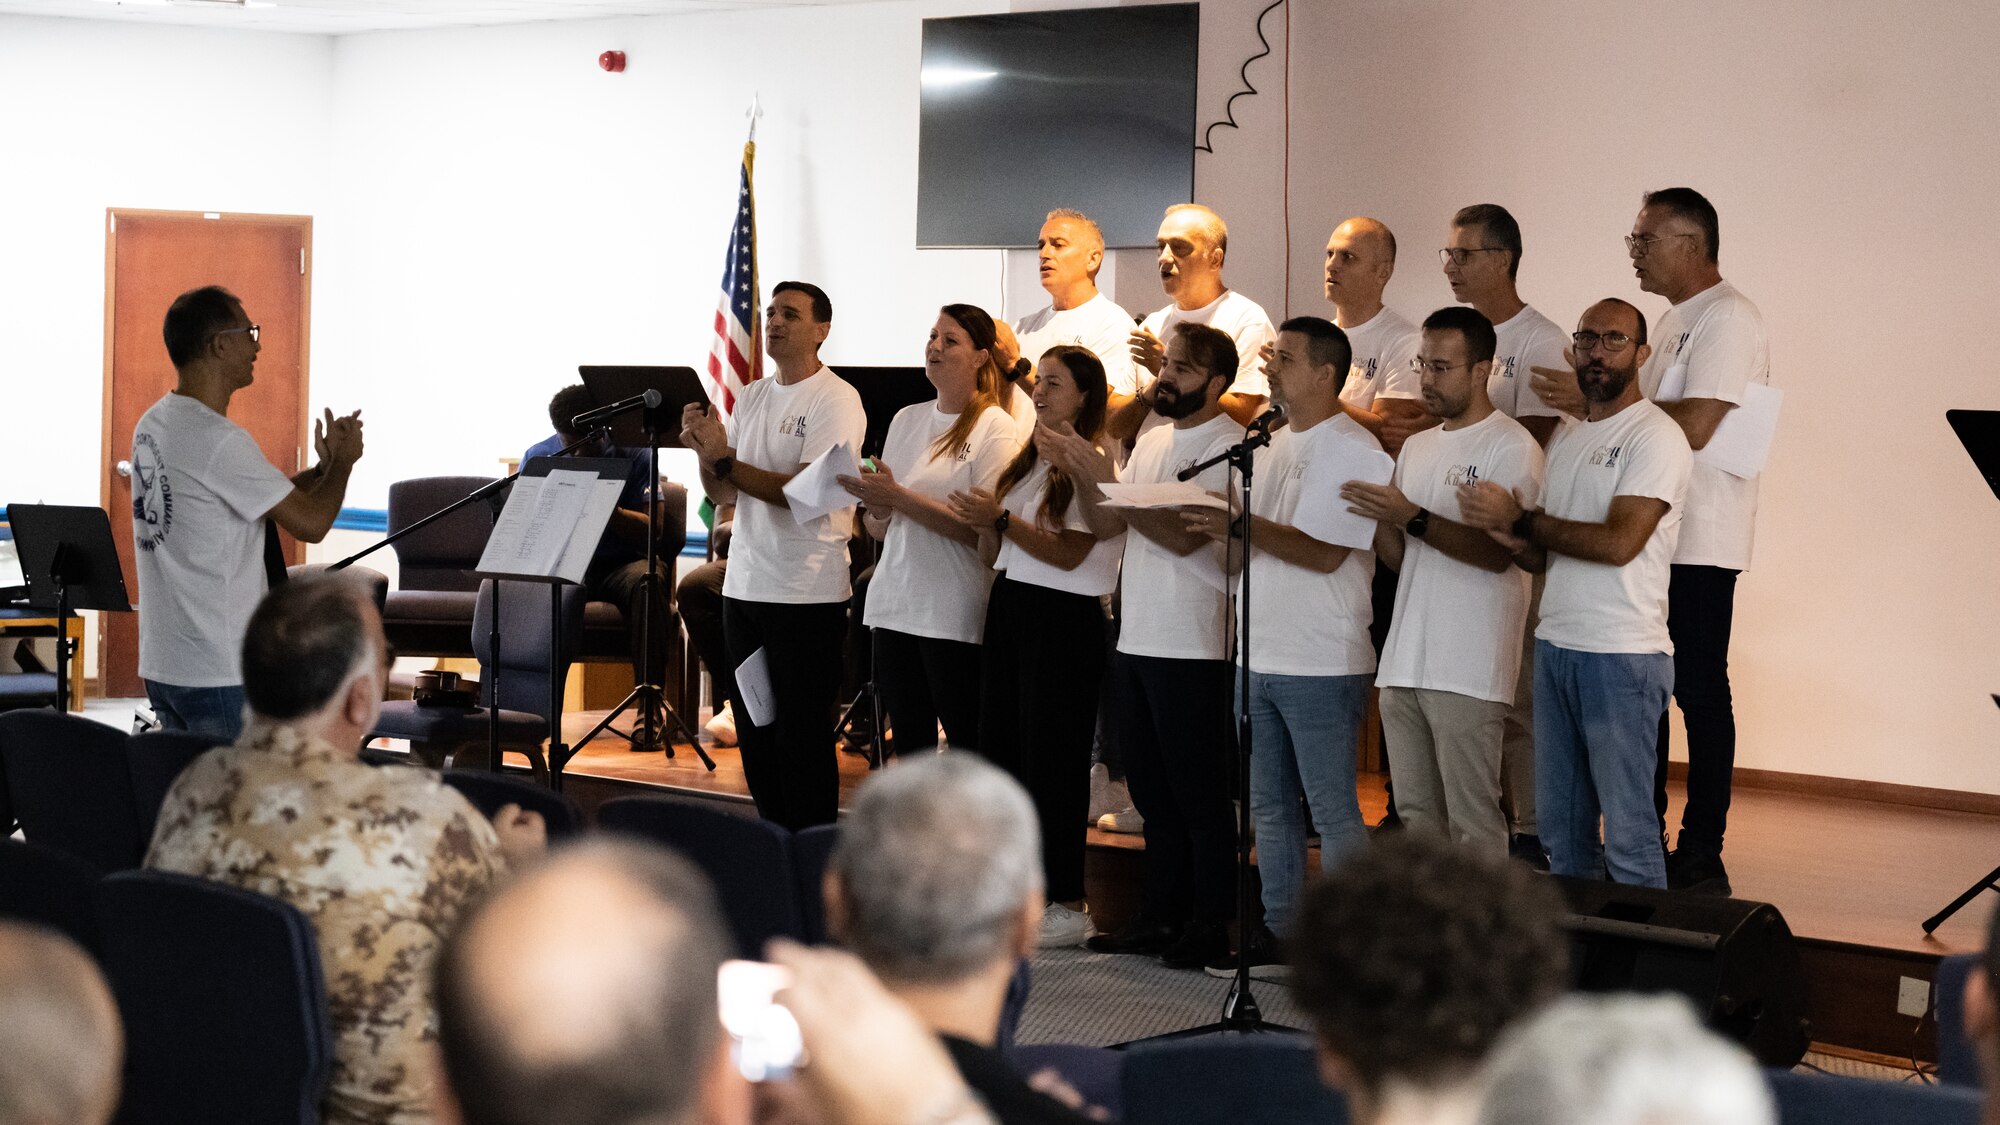 Members from the Italian choir perform a song together during a coalition worship event at the chapel at Ali Al Salem Air Base, Kuwait, Sept. 13, 2023. U.S. and partner nation forces from across the base came together for a night of song and prayer to bolster their spiritual fitness and cultivate the inclusiveness that power our enduring partnerships. (U.S. Air Force photo by Staff Sgt. Kevin Long)